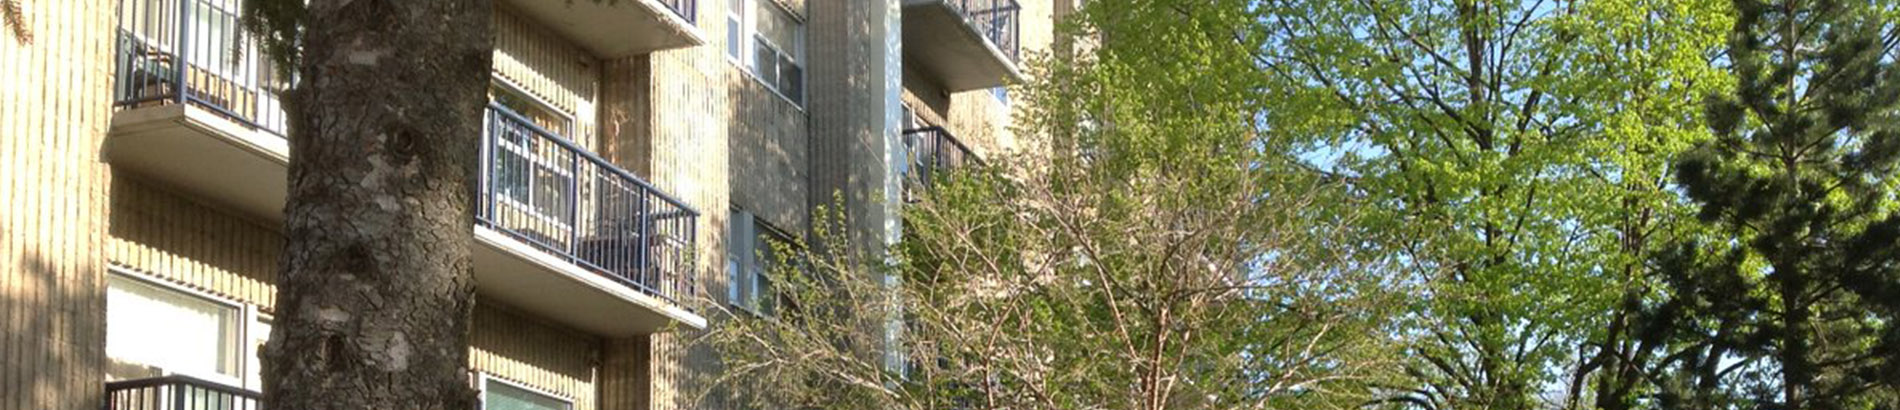 apartment building with balconies set behind trees